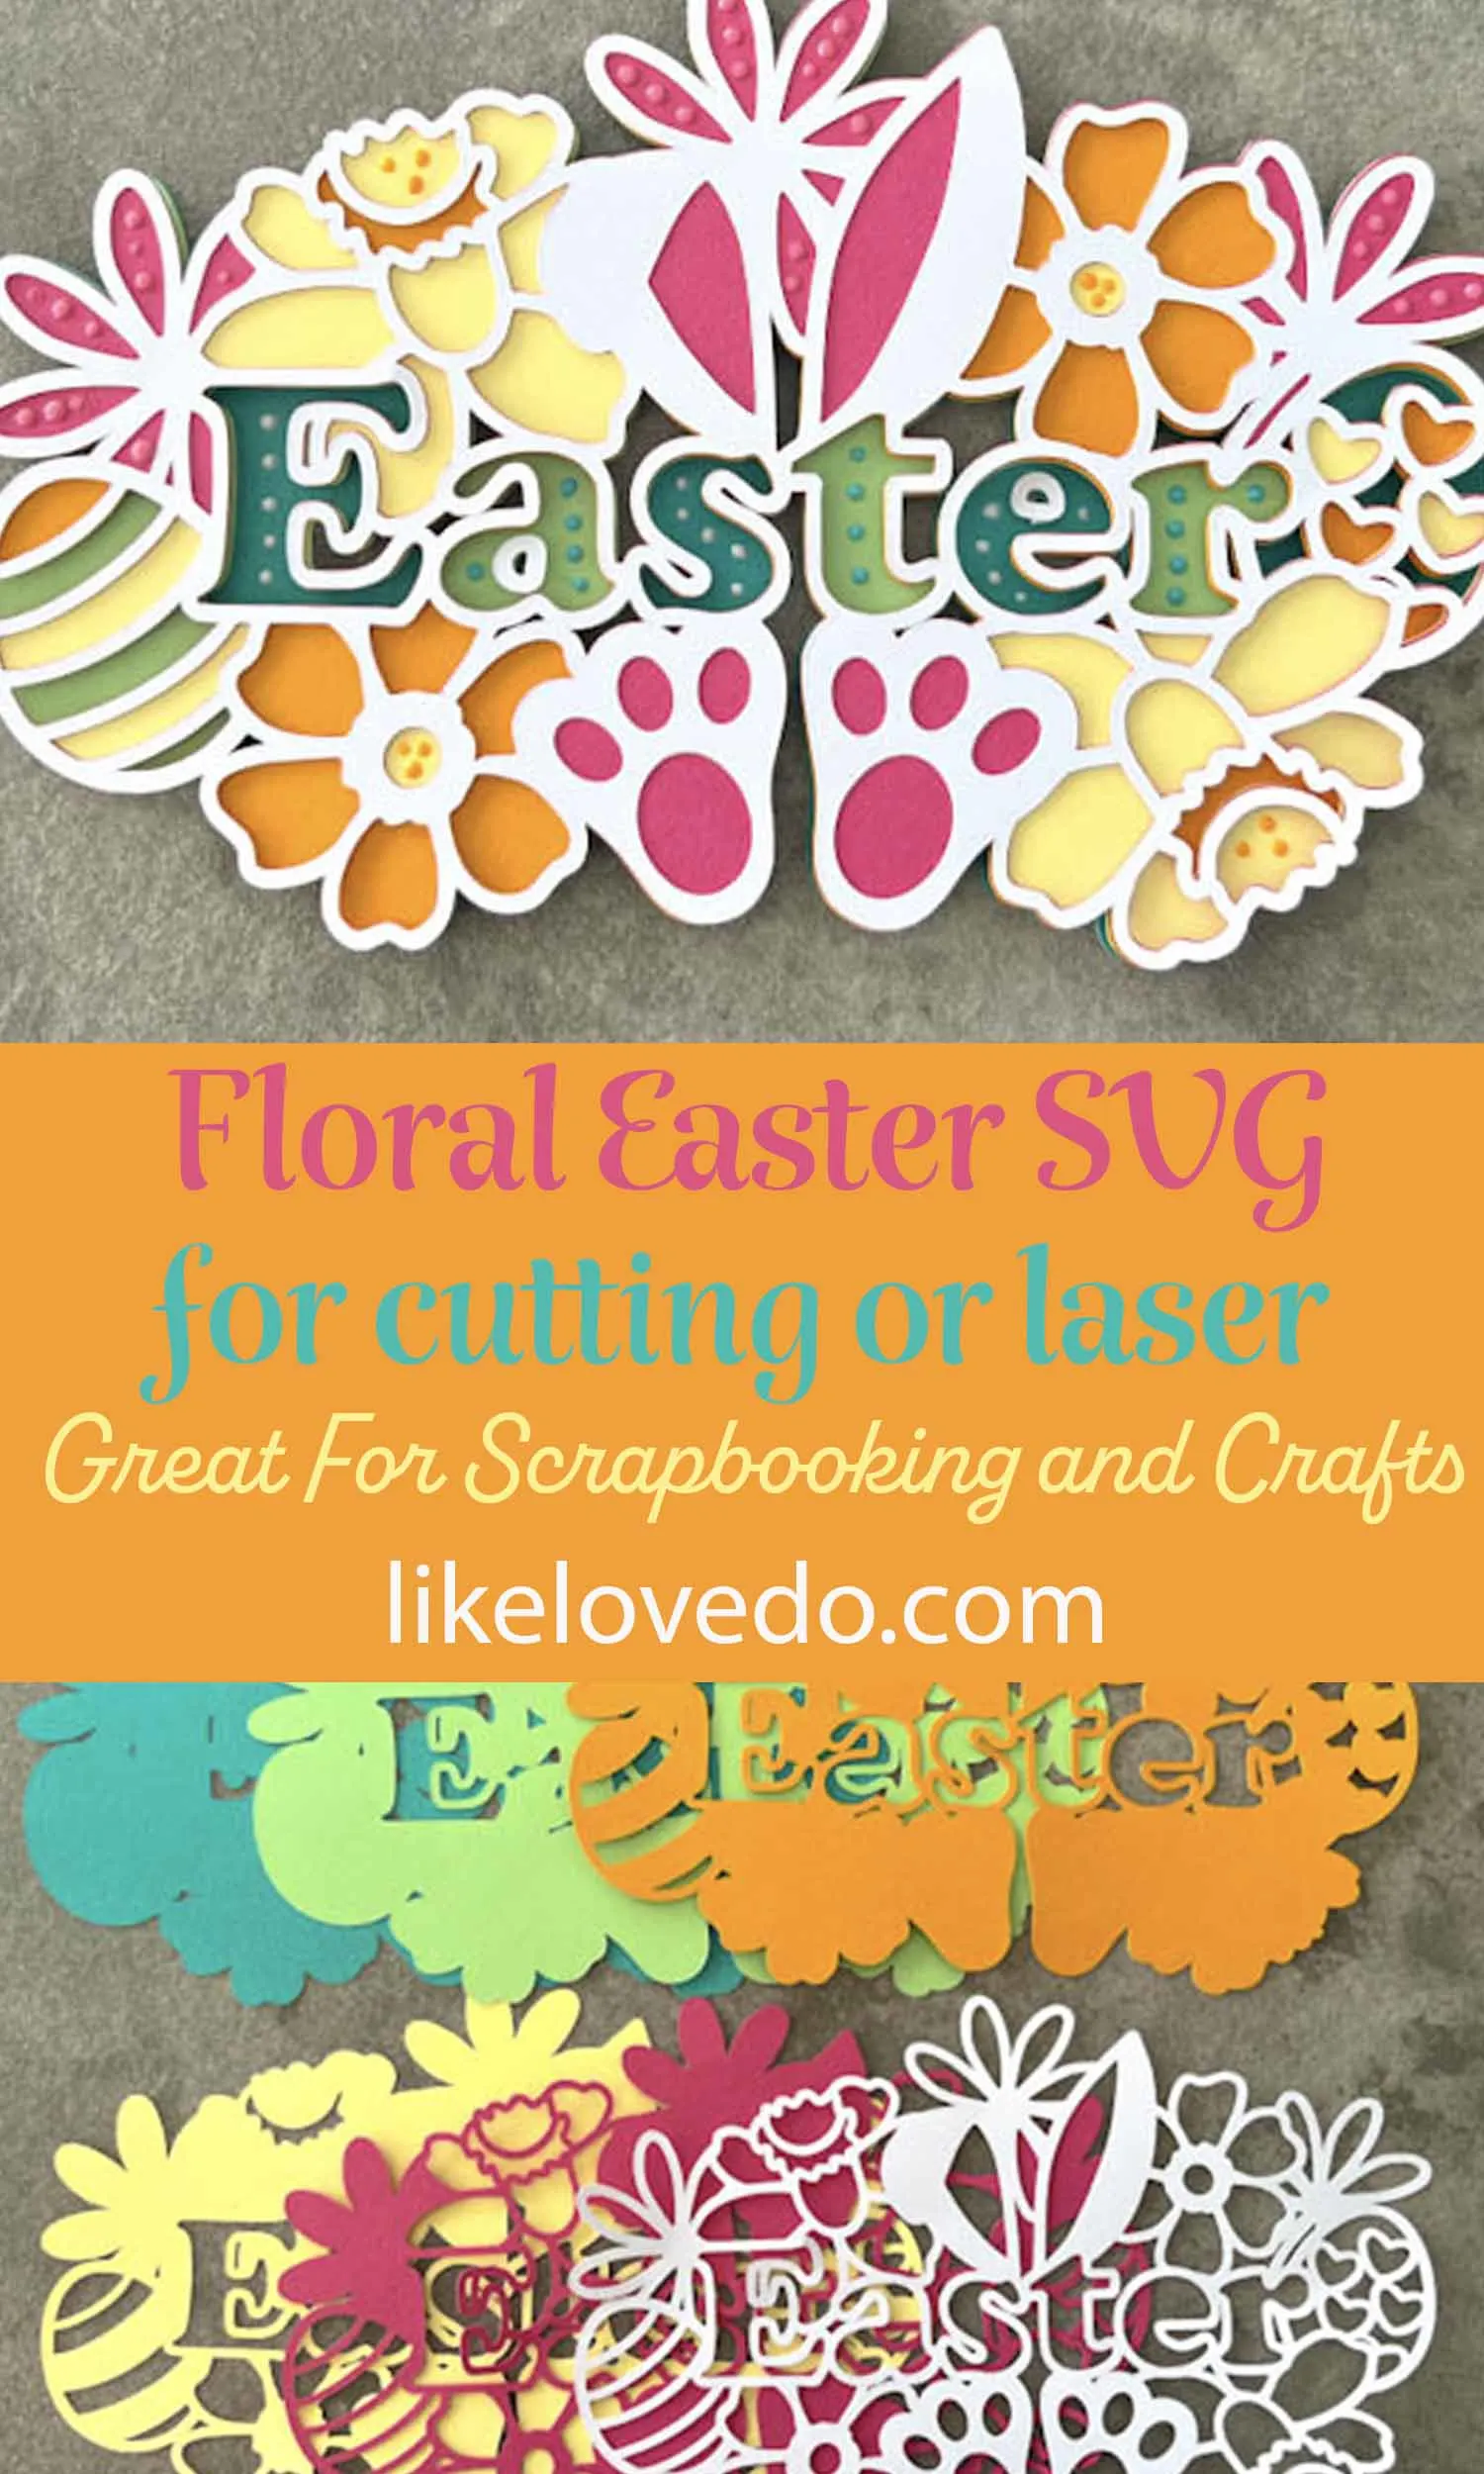 Free Layered Floral Easter SVG